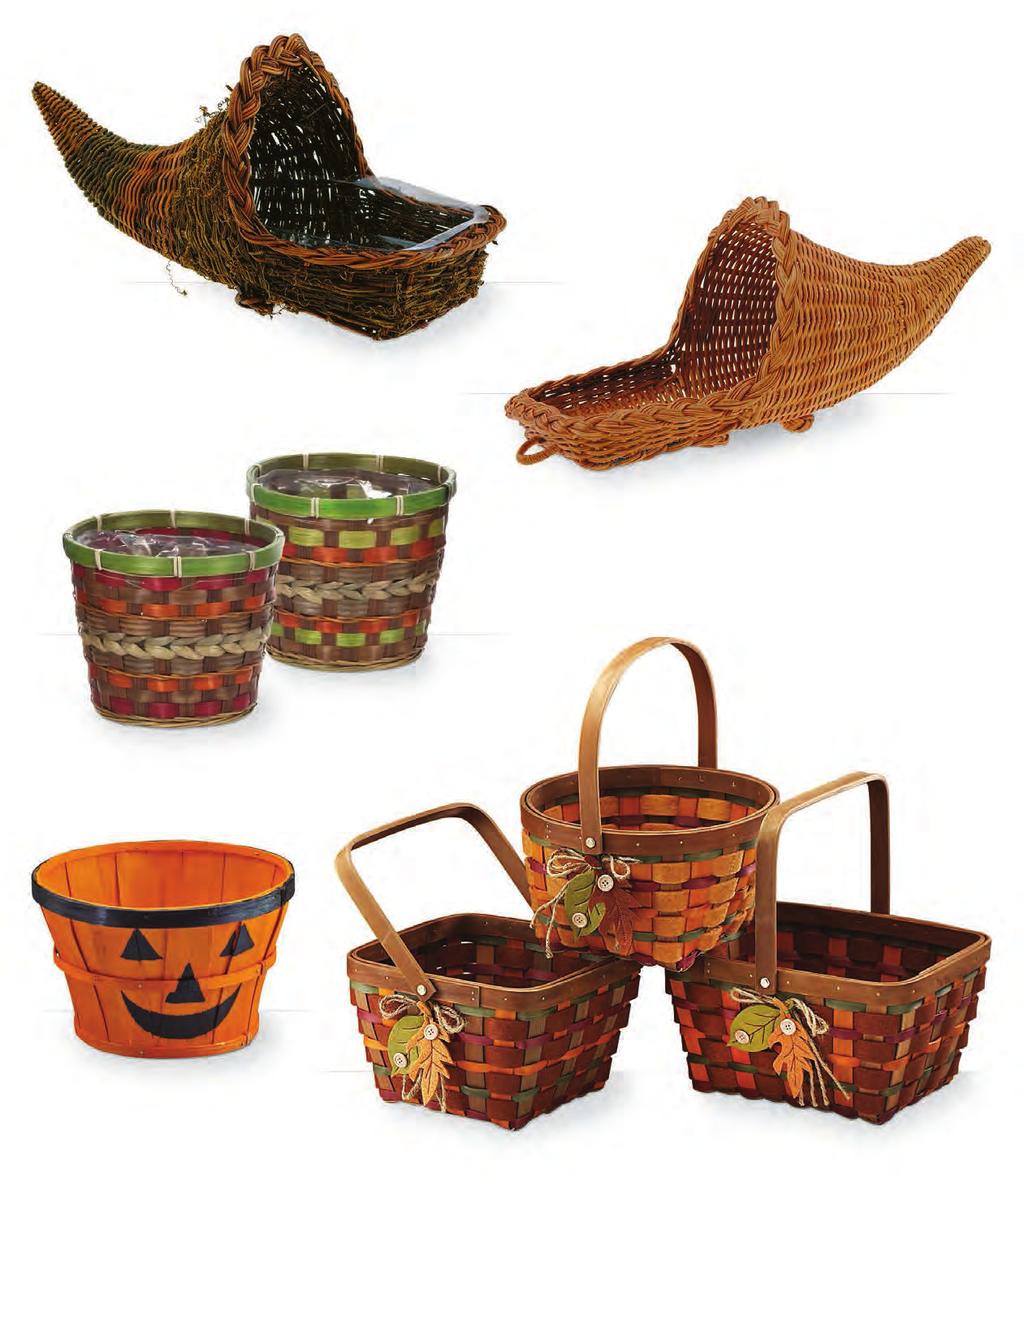 4416 Fern and Vine Cornucopia Plastic liner included 5.5 opening x 14 long 8/$3.49 ea. 73378 Fern Cornucopia Plastic liner included 5.5 opening x 14 long 8/$3.49 ea. 14339 Round Woodchip and Bamboo Container Two assorted 7 diameter x 6 tall With sewn-in liner 12/$3.